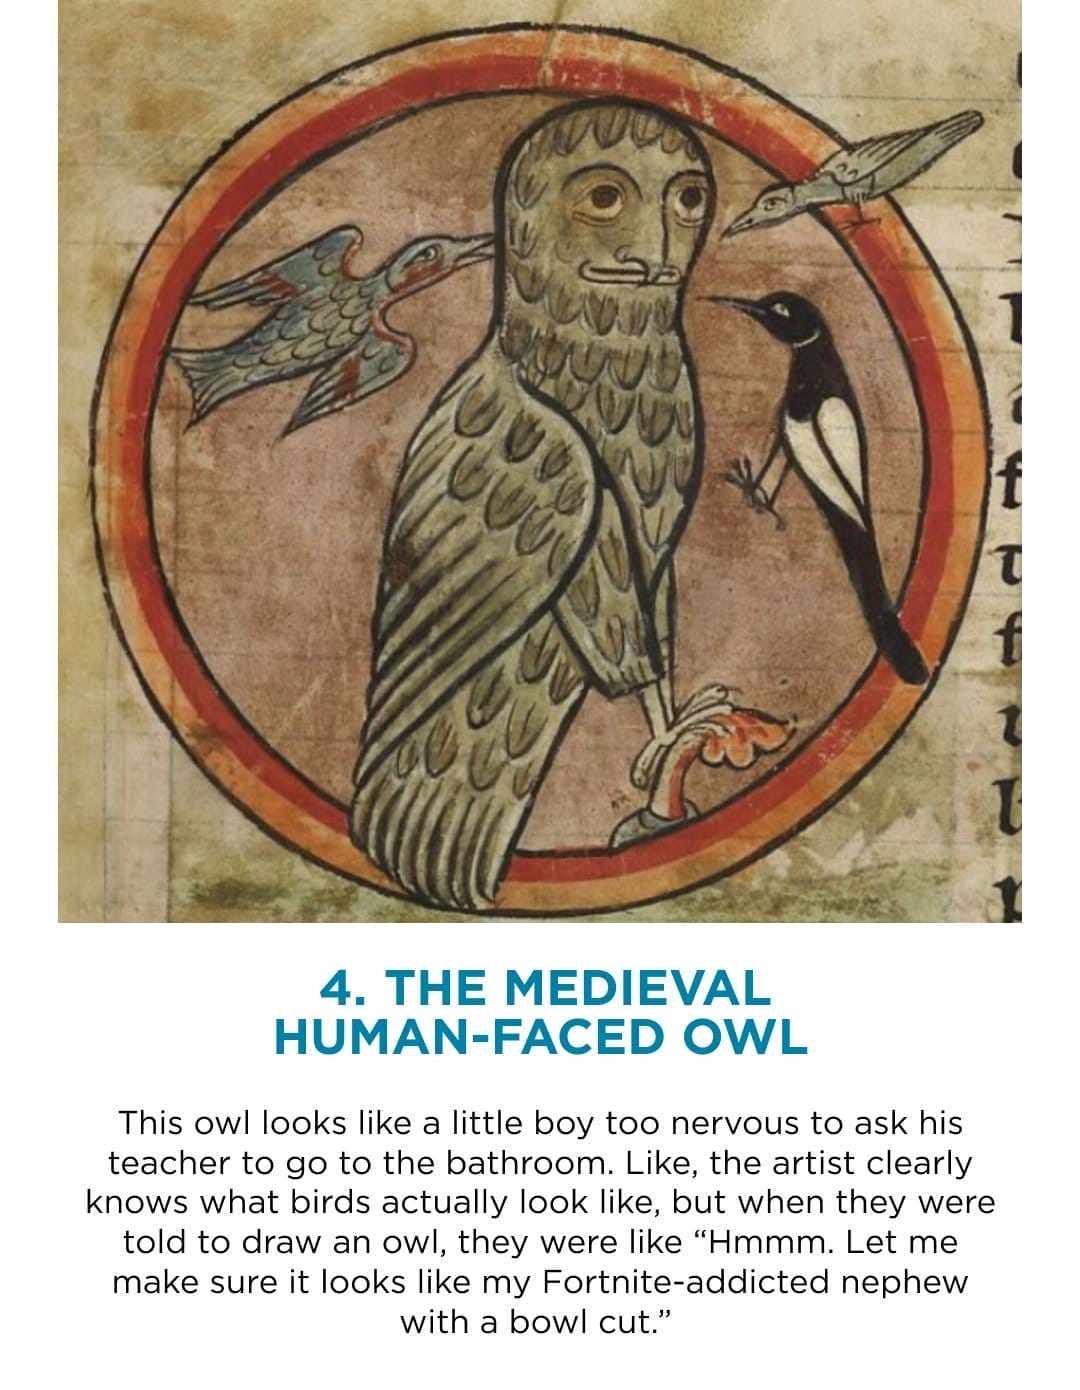 4. The Medieval Human-Faced Owl